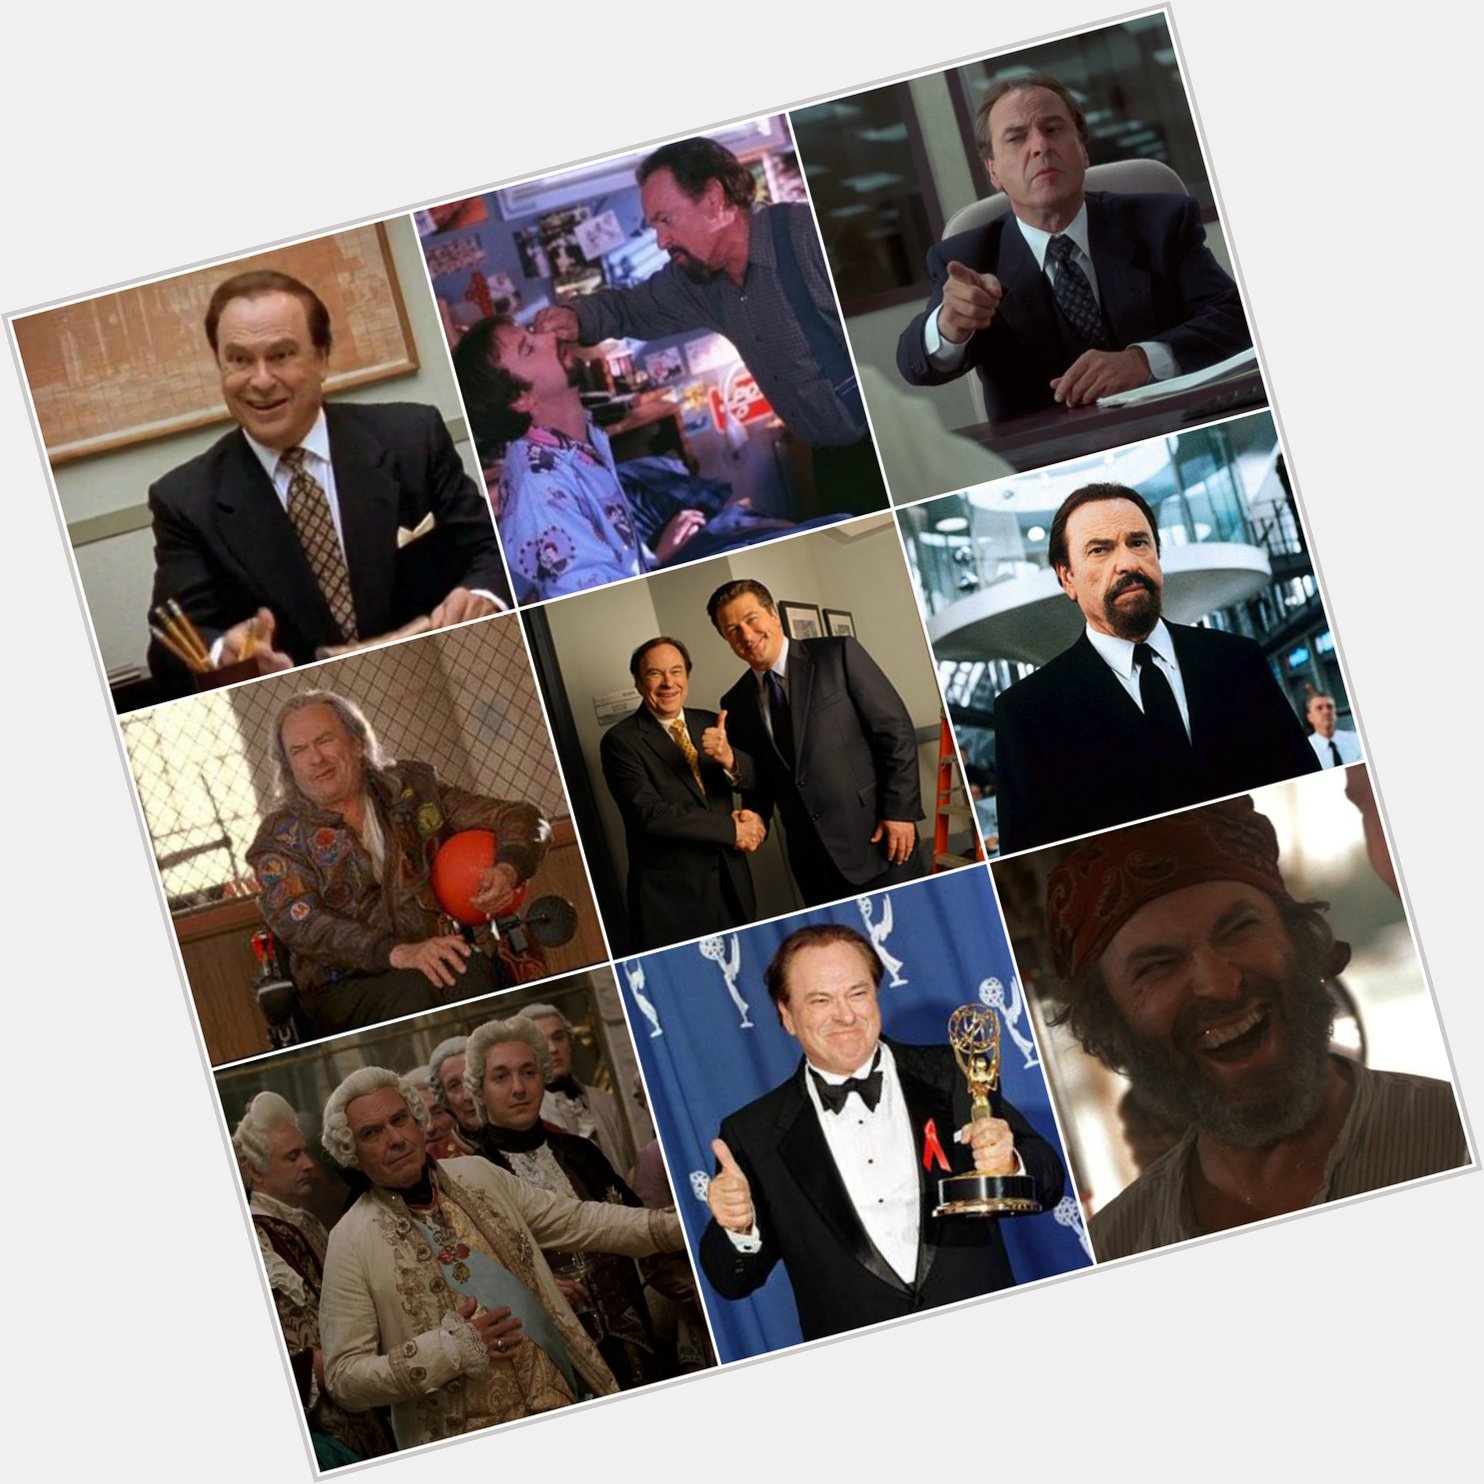 Rip Torn has outlived his 86th trip around the sun. HAPPY BIRTHDAY RIP TORN! 